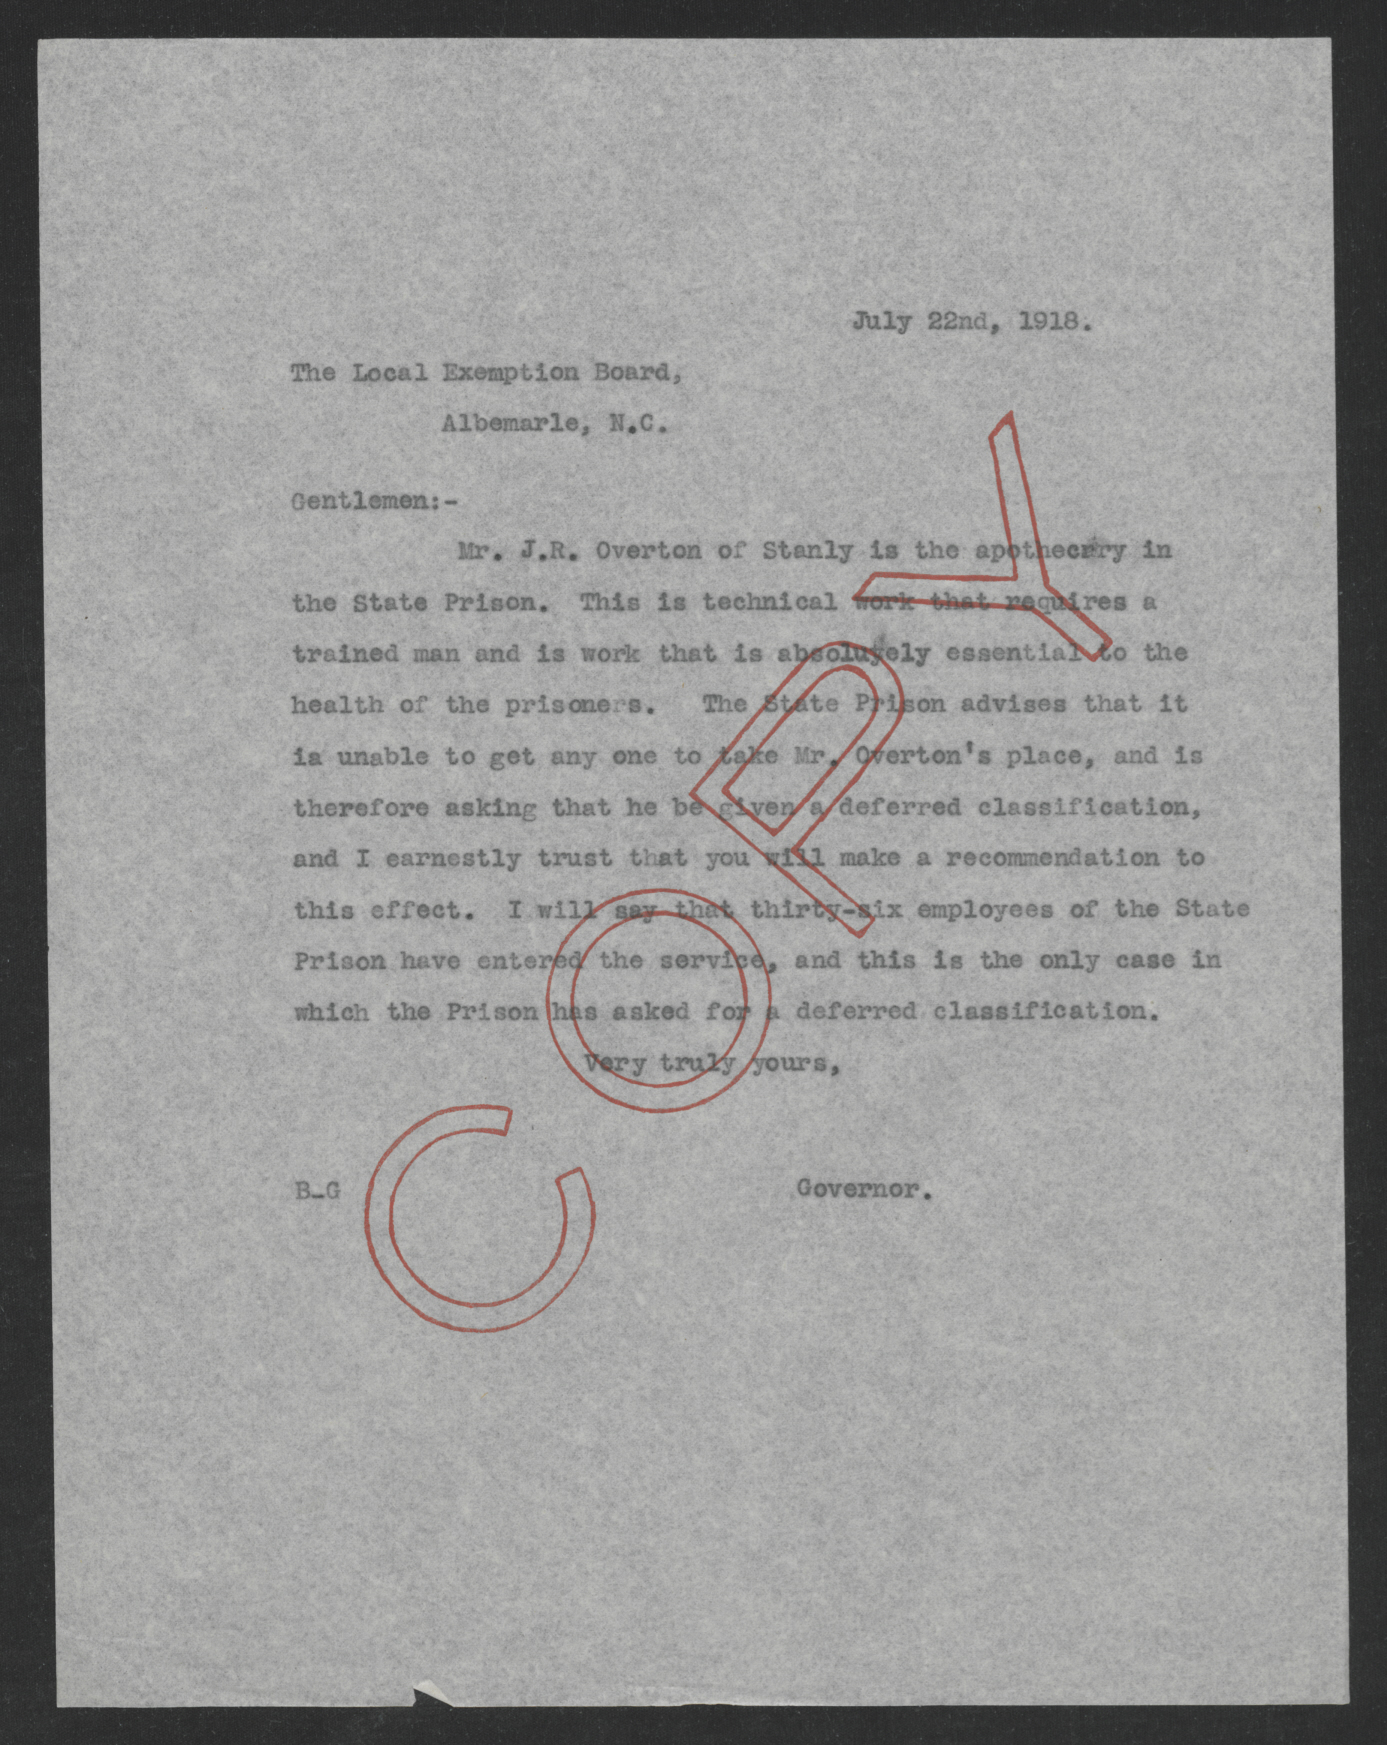 Letter from Thomas W. Bickett to the Stanly County Exemption Board, July 22, 1918